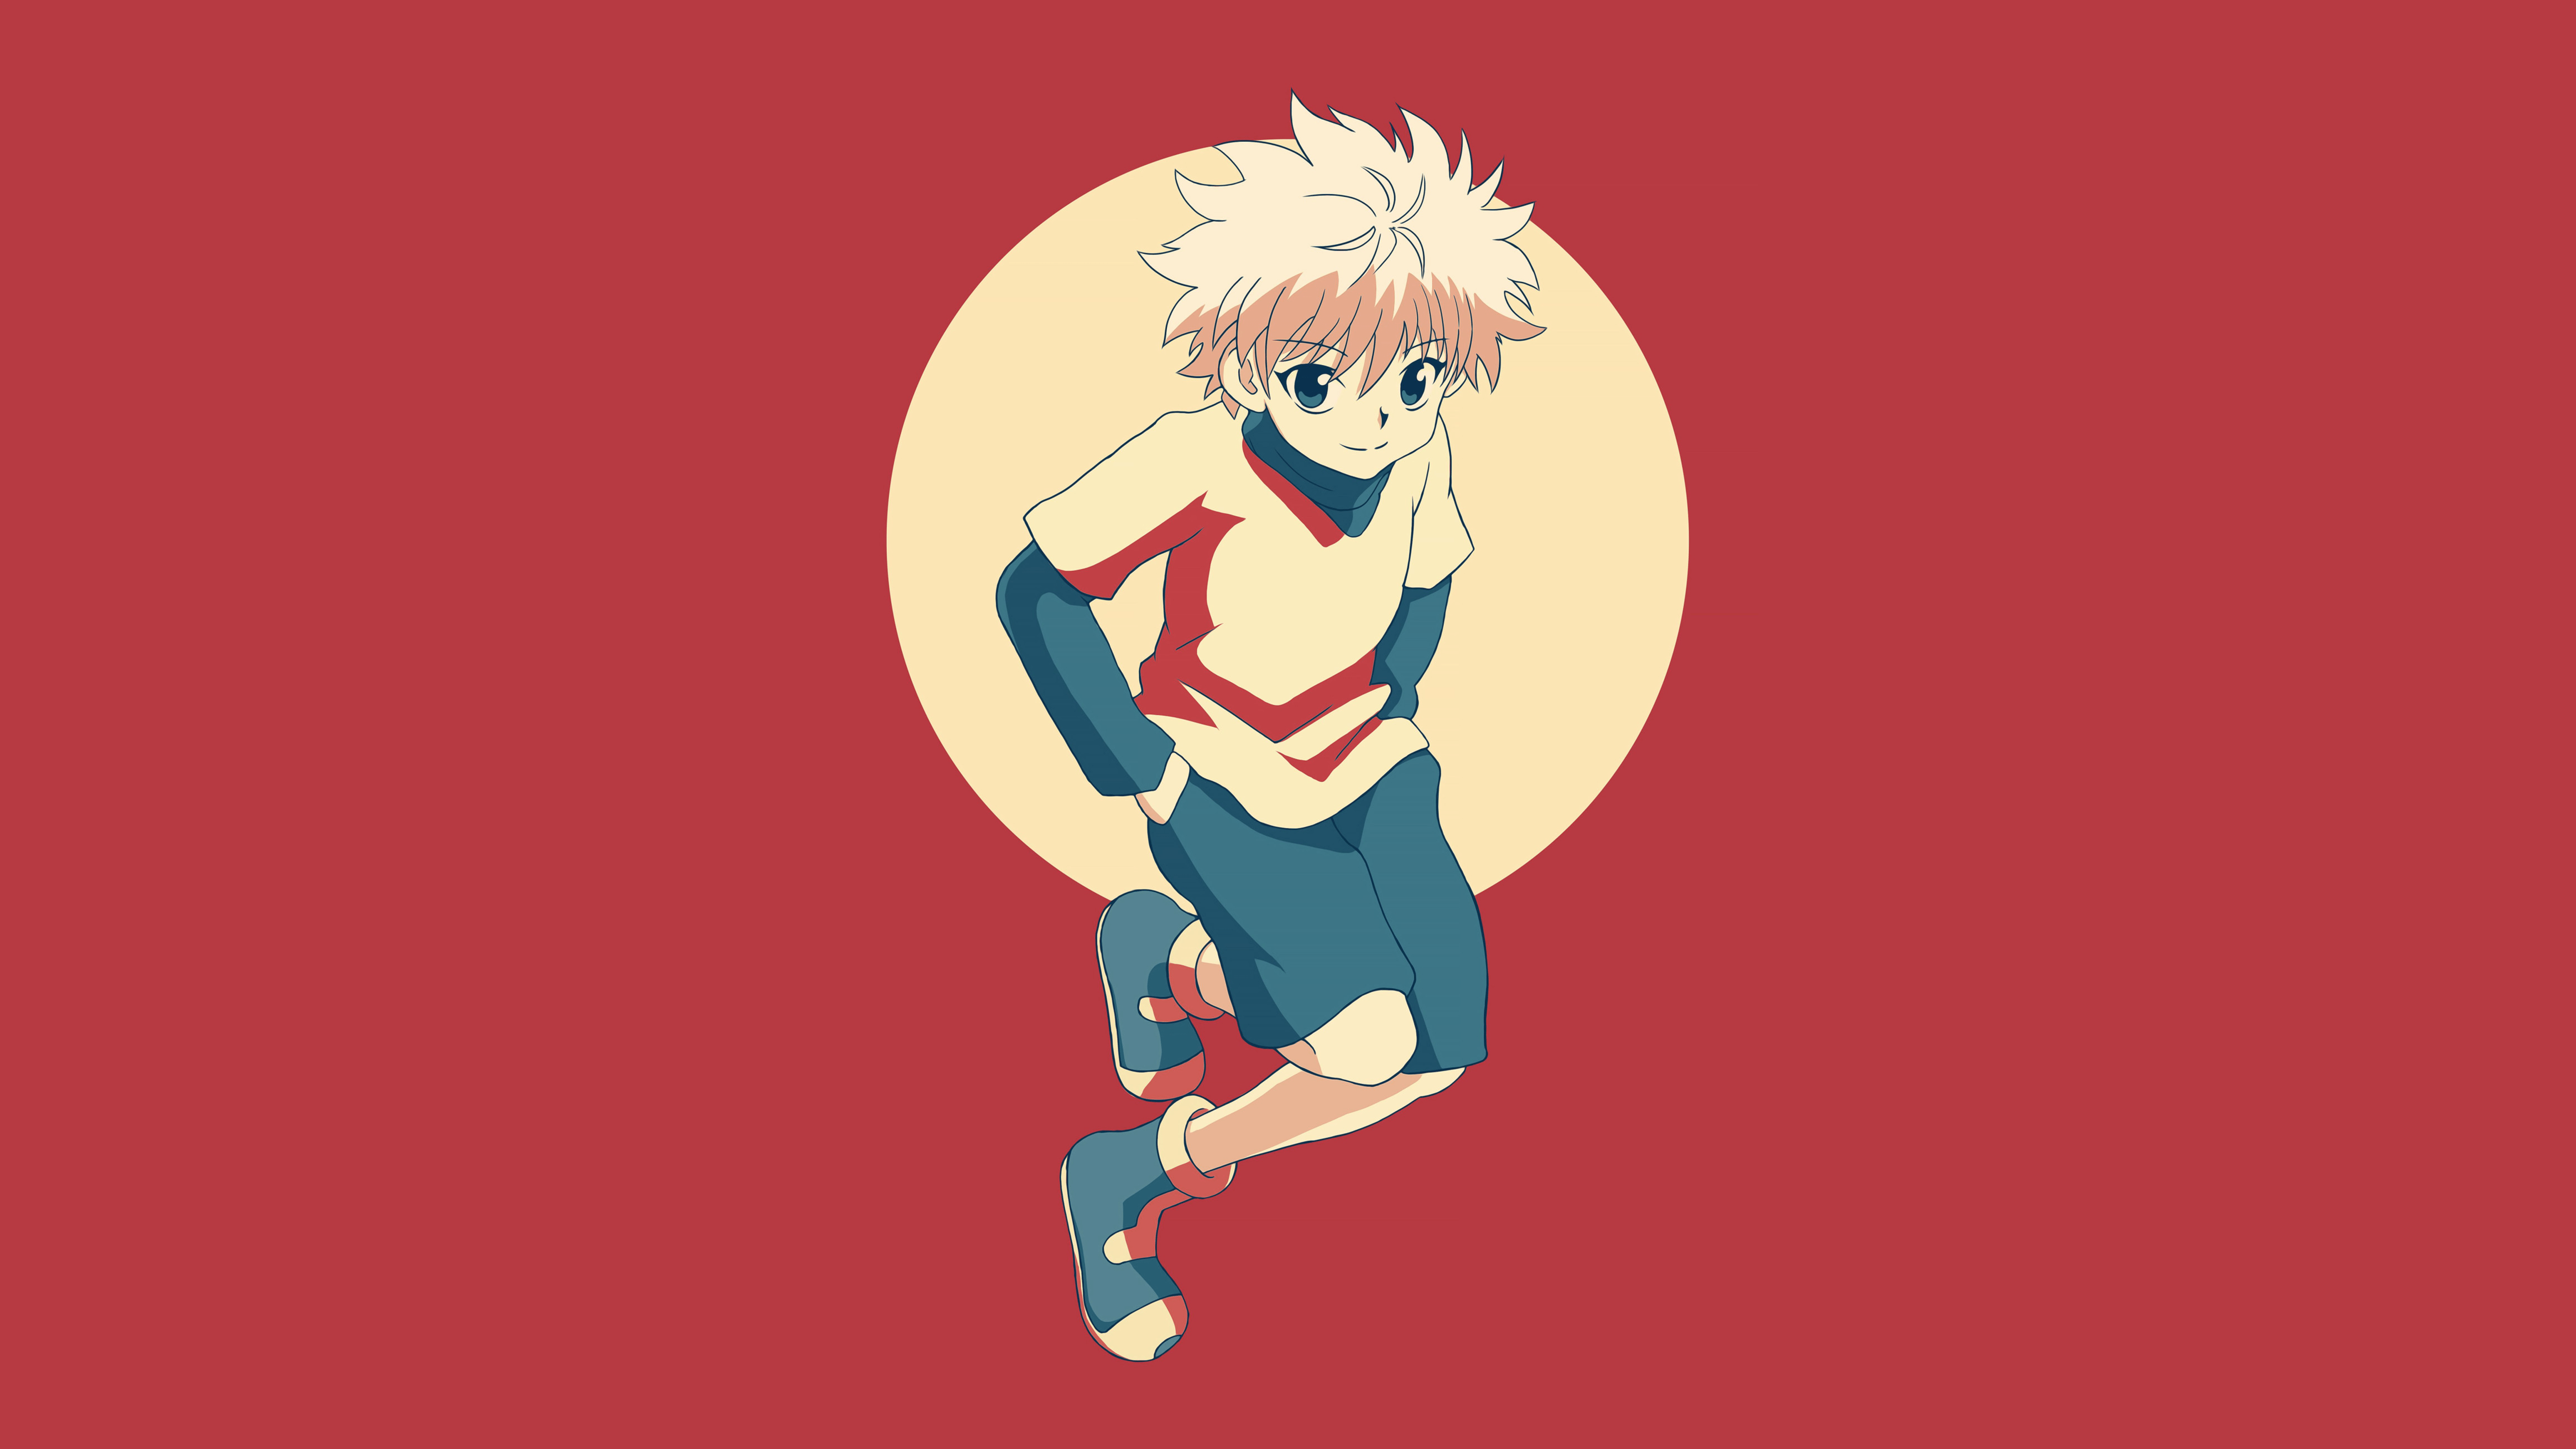 Gon from Hunter x Hunter, with a red background - Killua